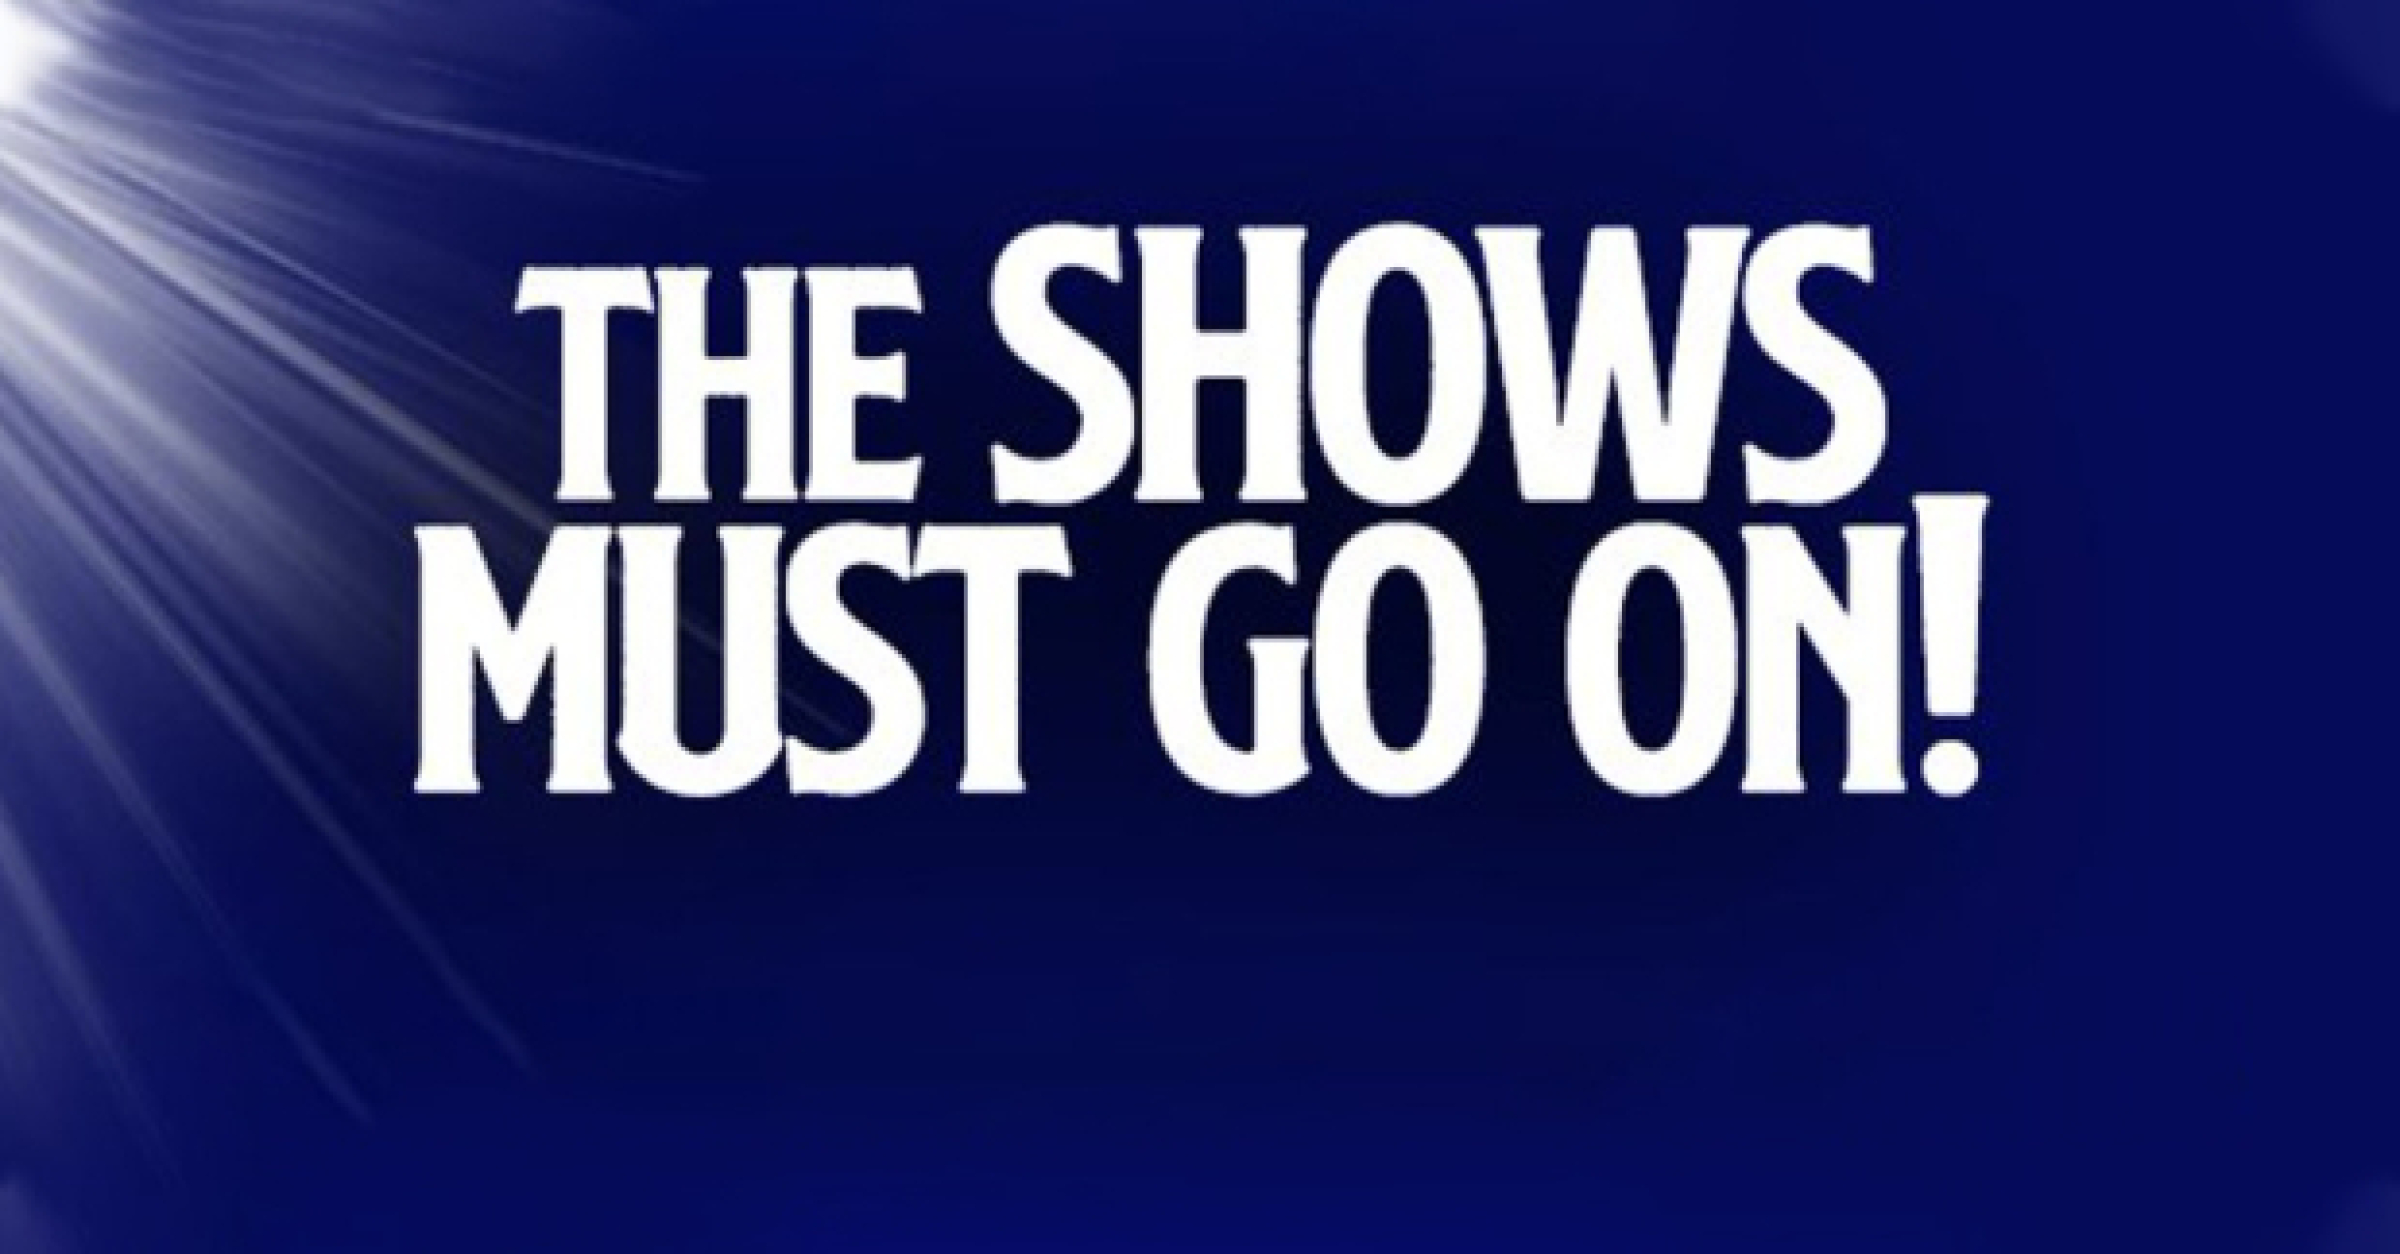 Motivational Content For Tough Times – The Show Must Go On